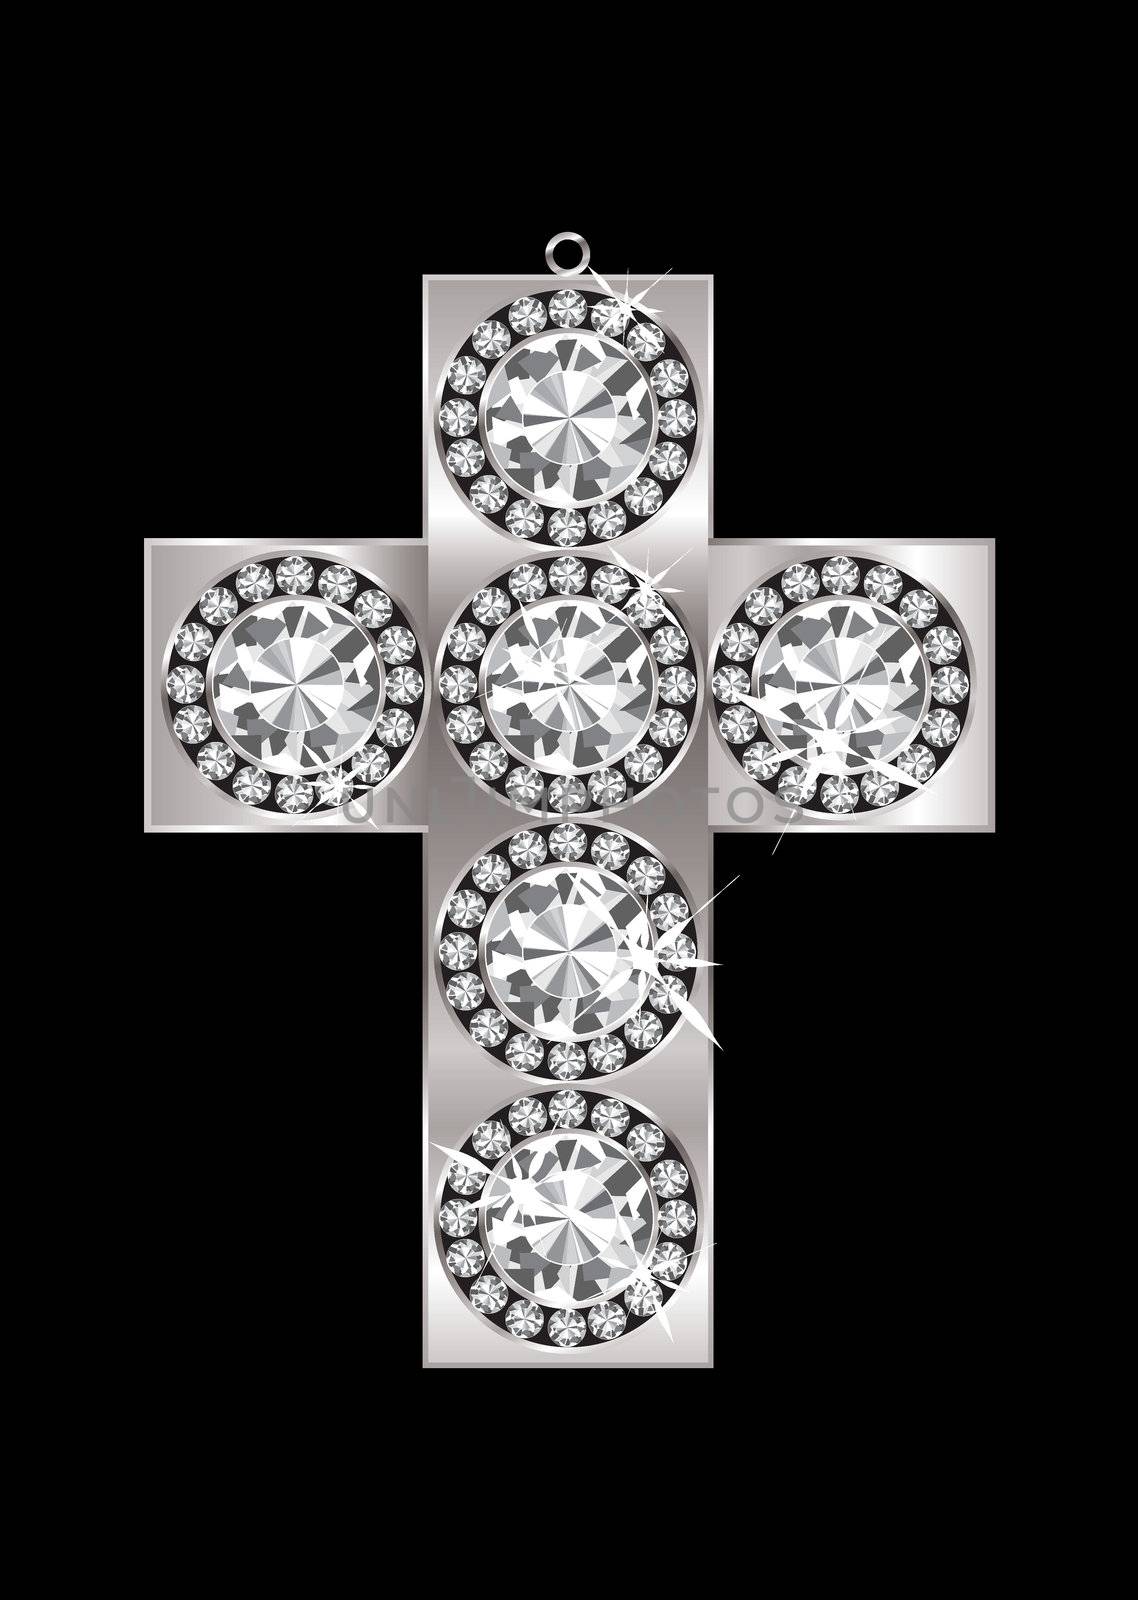 Silver crucifix pendant encrusted with diamonds and black background